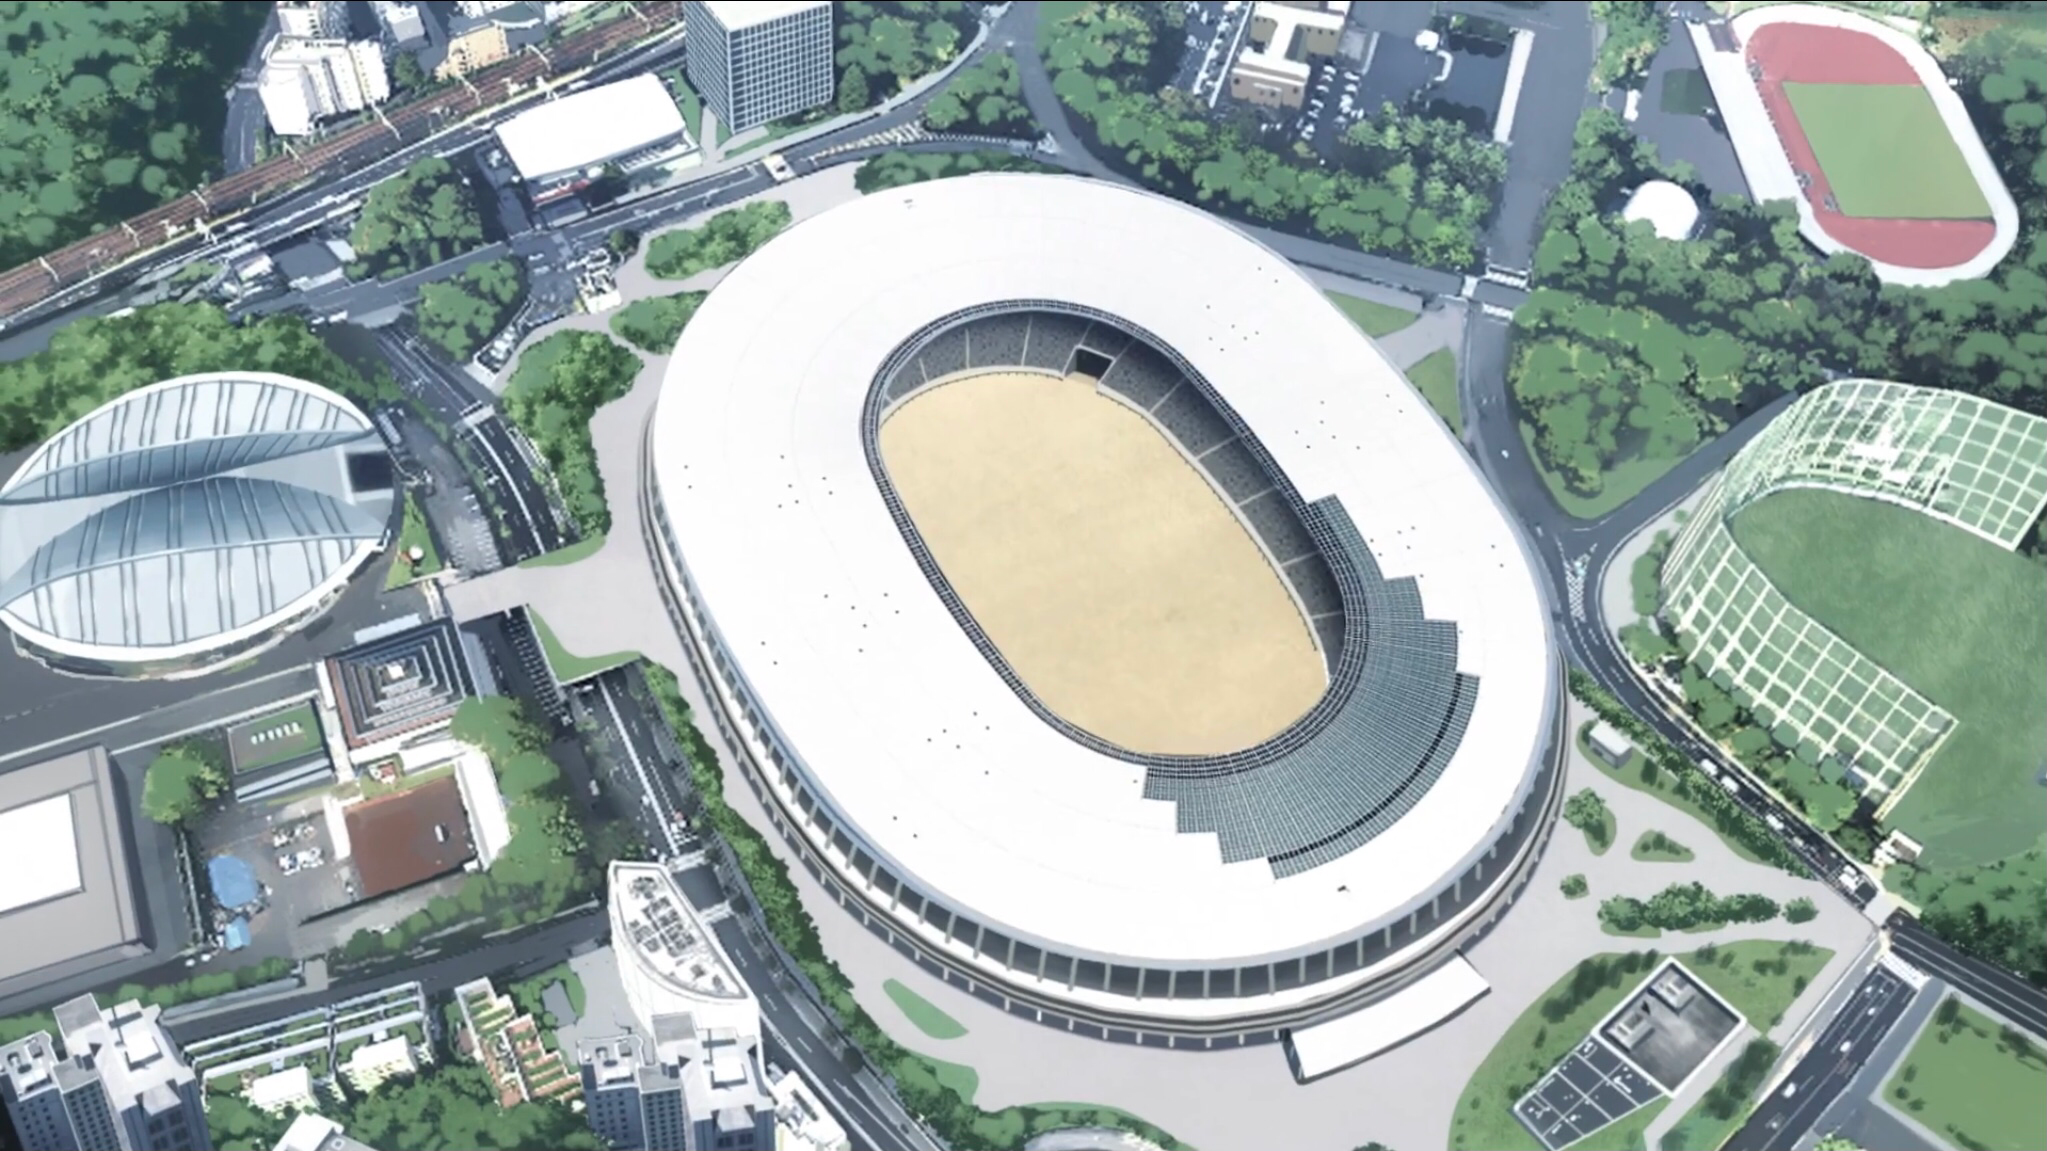 Where could I buy a real life Anime stadium?